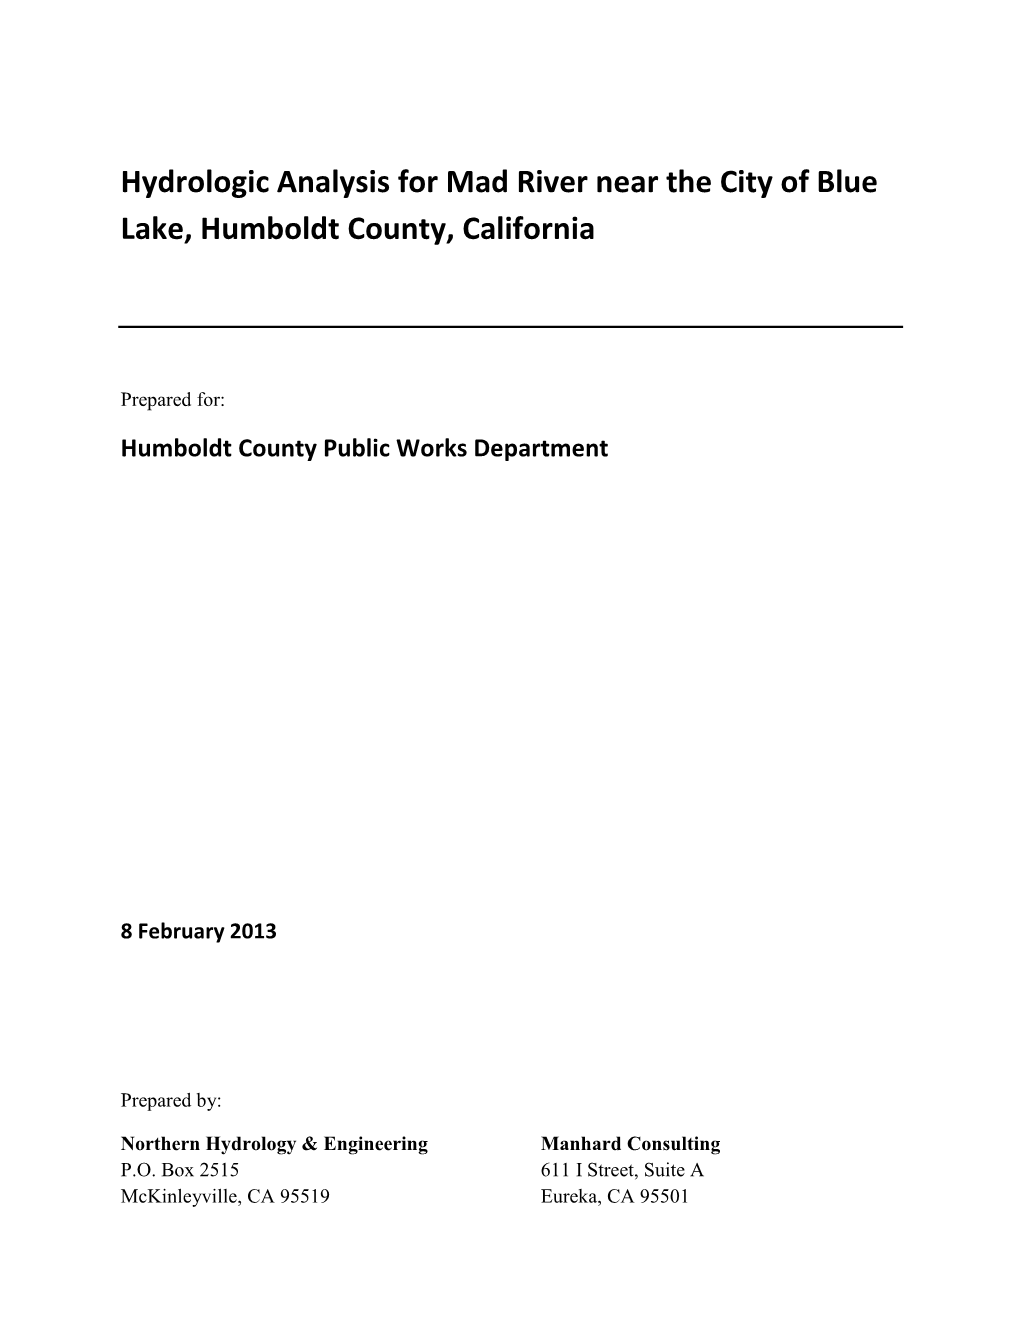 Hydrologic Analysis for Mad River Near the City of Blue Lake, Humboldt County, California